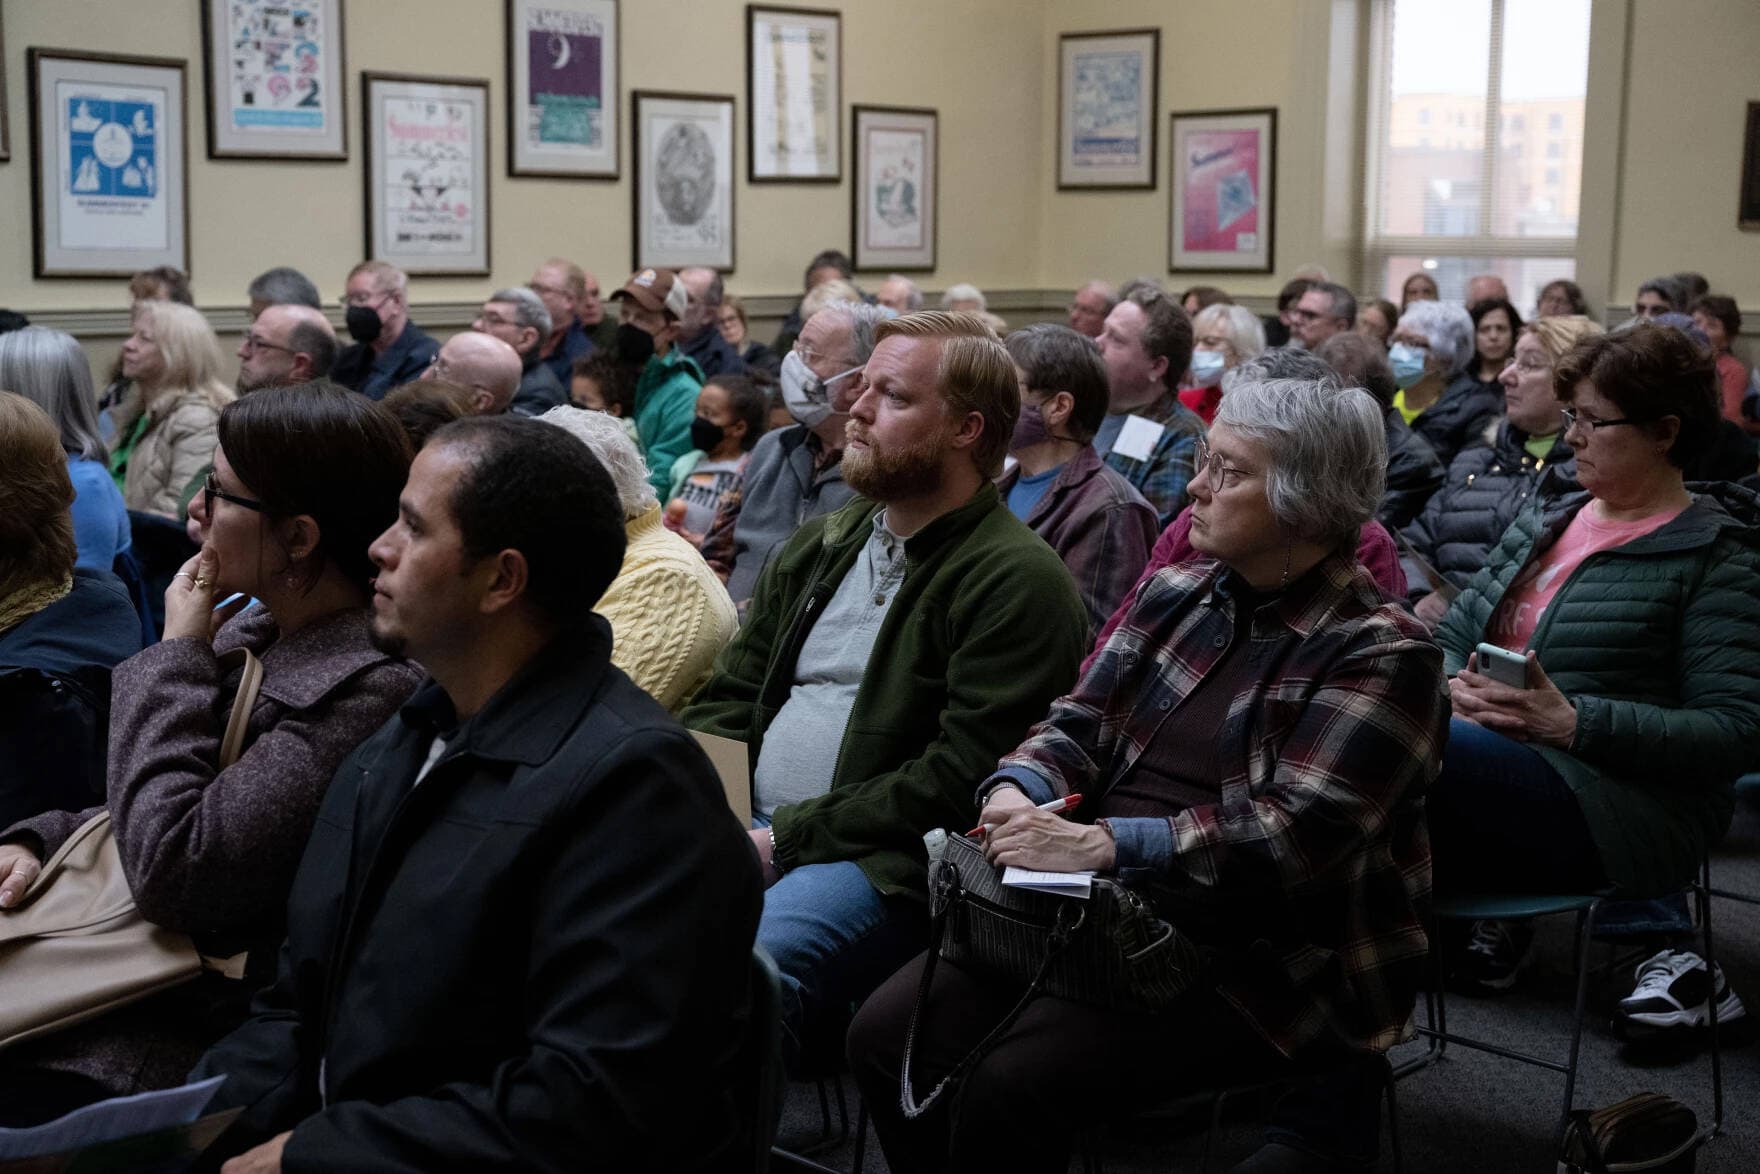 Nashua residents attend a meeting about community power on April 5, at City Hall in Nashua, N.H. (Raquel C. Zaldívar/New England News Collaborative)